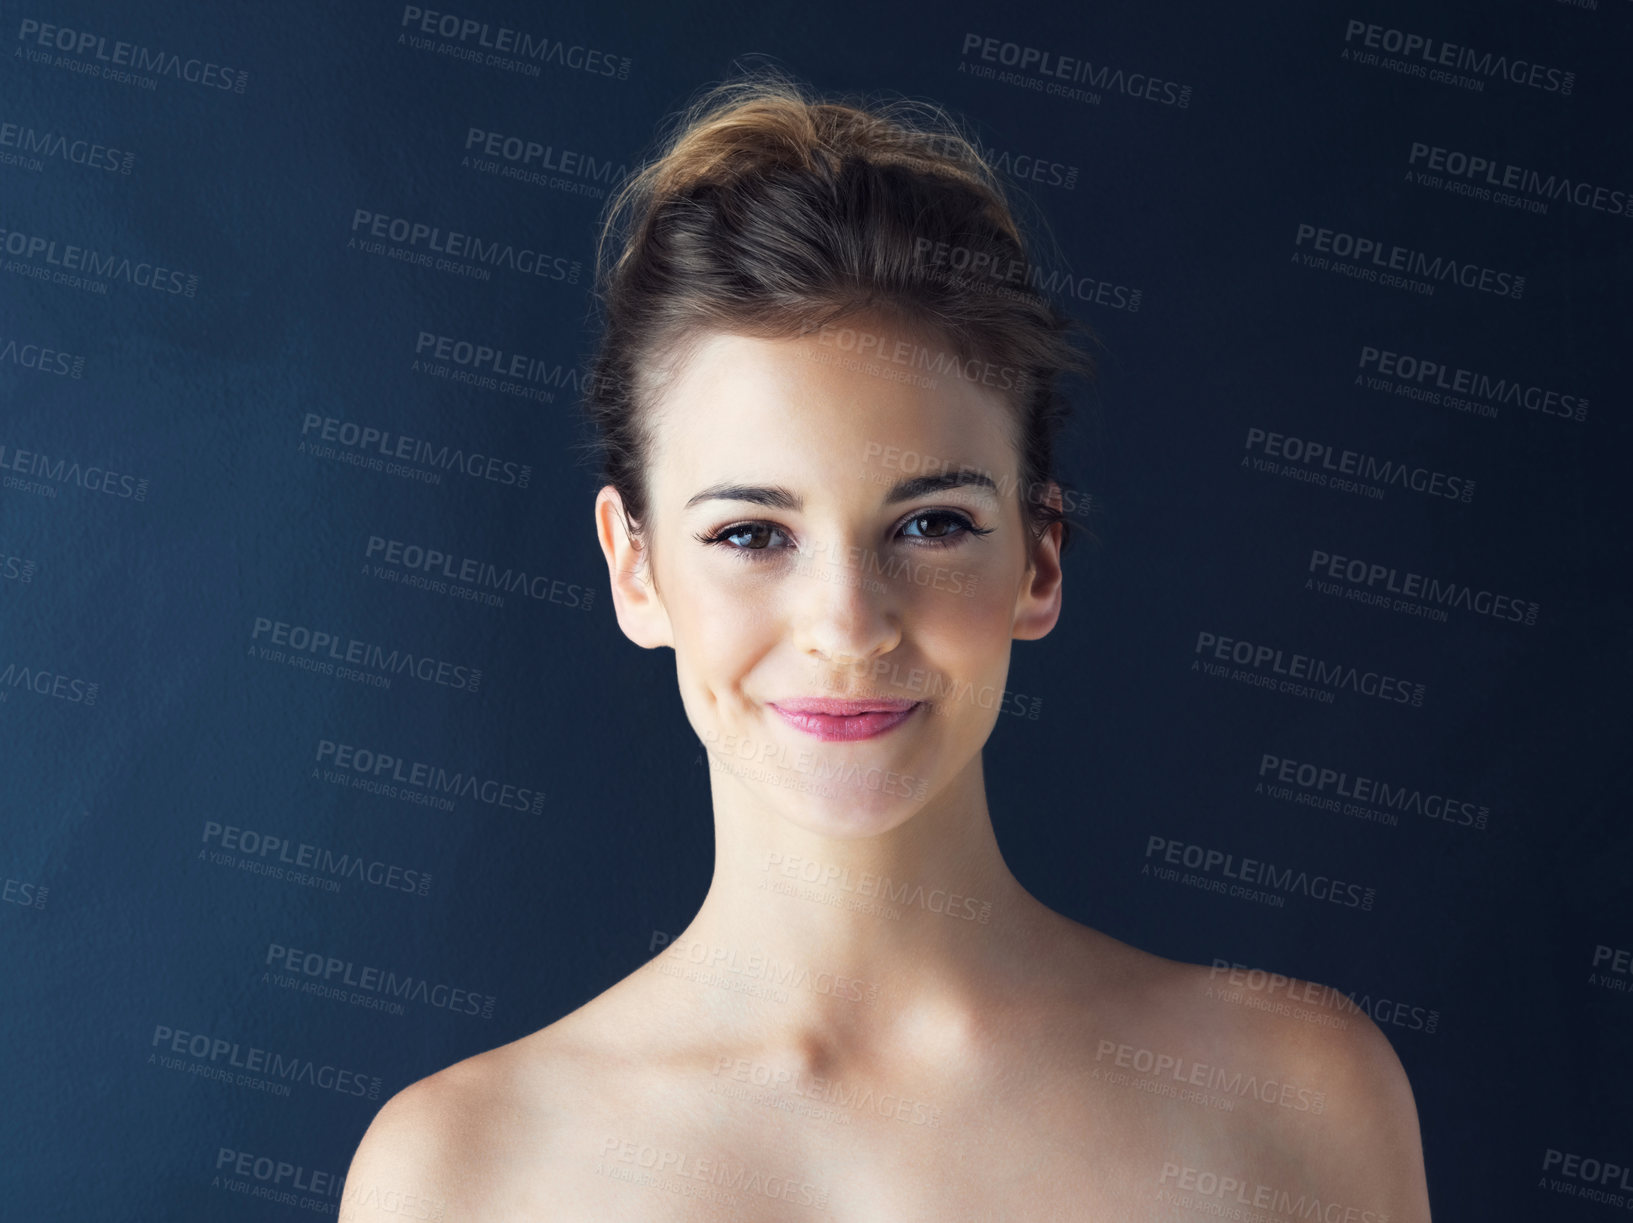 Buy stock photo Cropped shot of a beautiful young woman posing in the studio